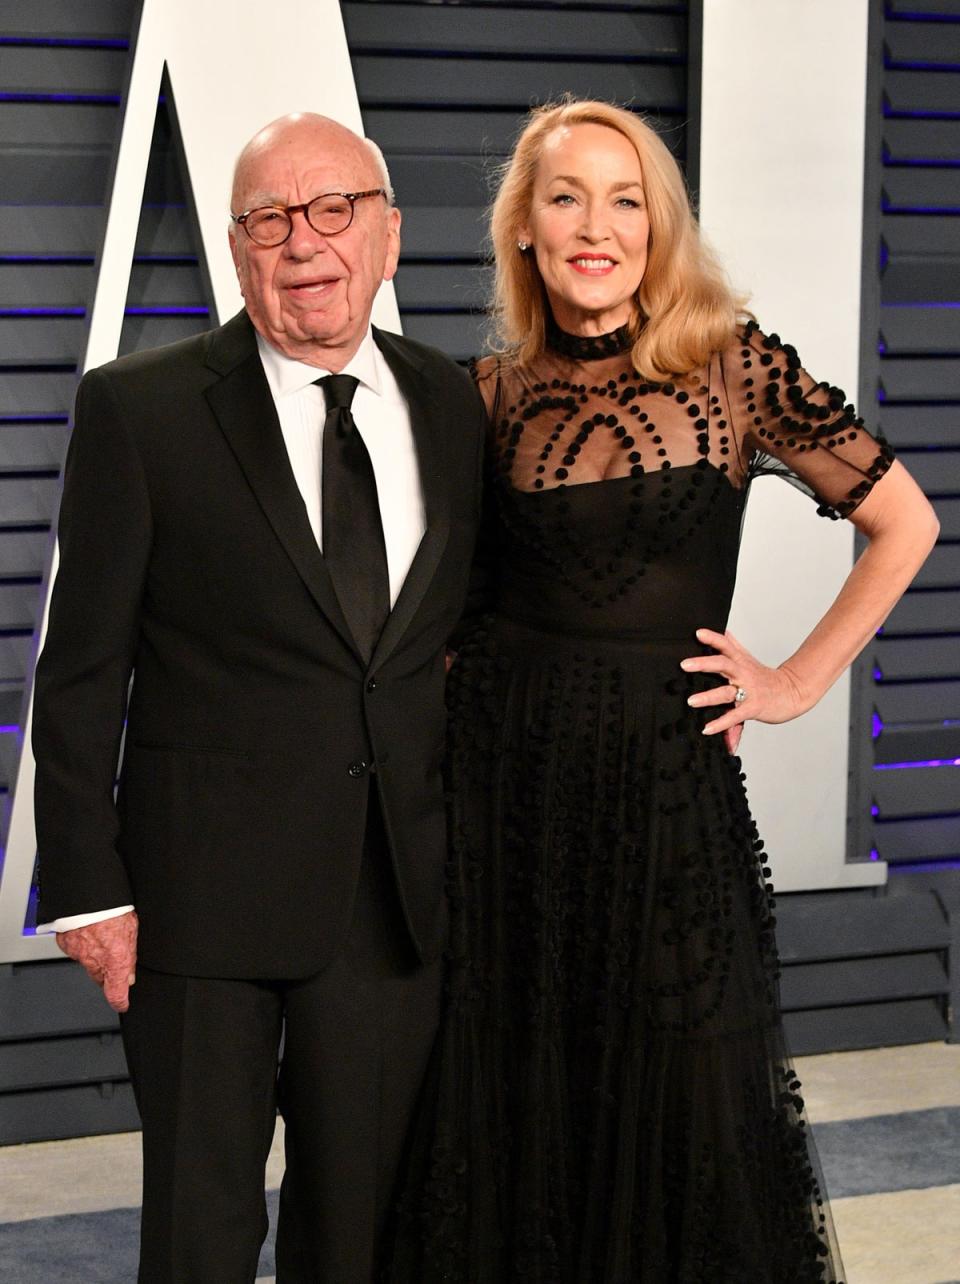 2019: Rupert Murdoch and Jerry Hall attend the 2019 Vanity Fair Oscar Party: (Getty Images)